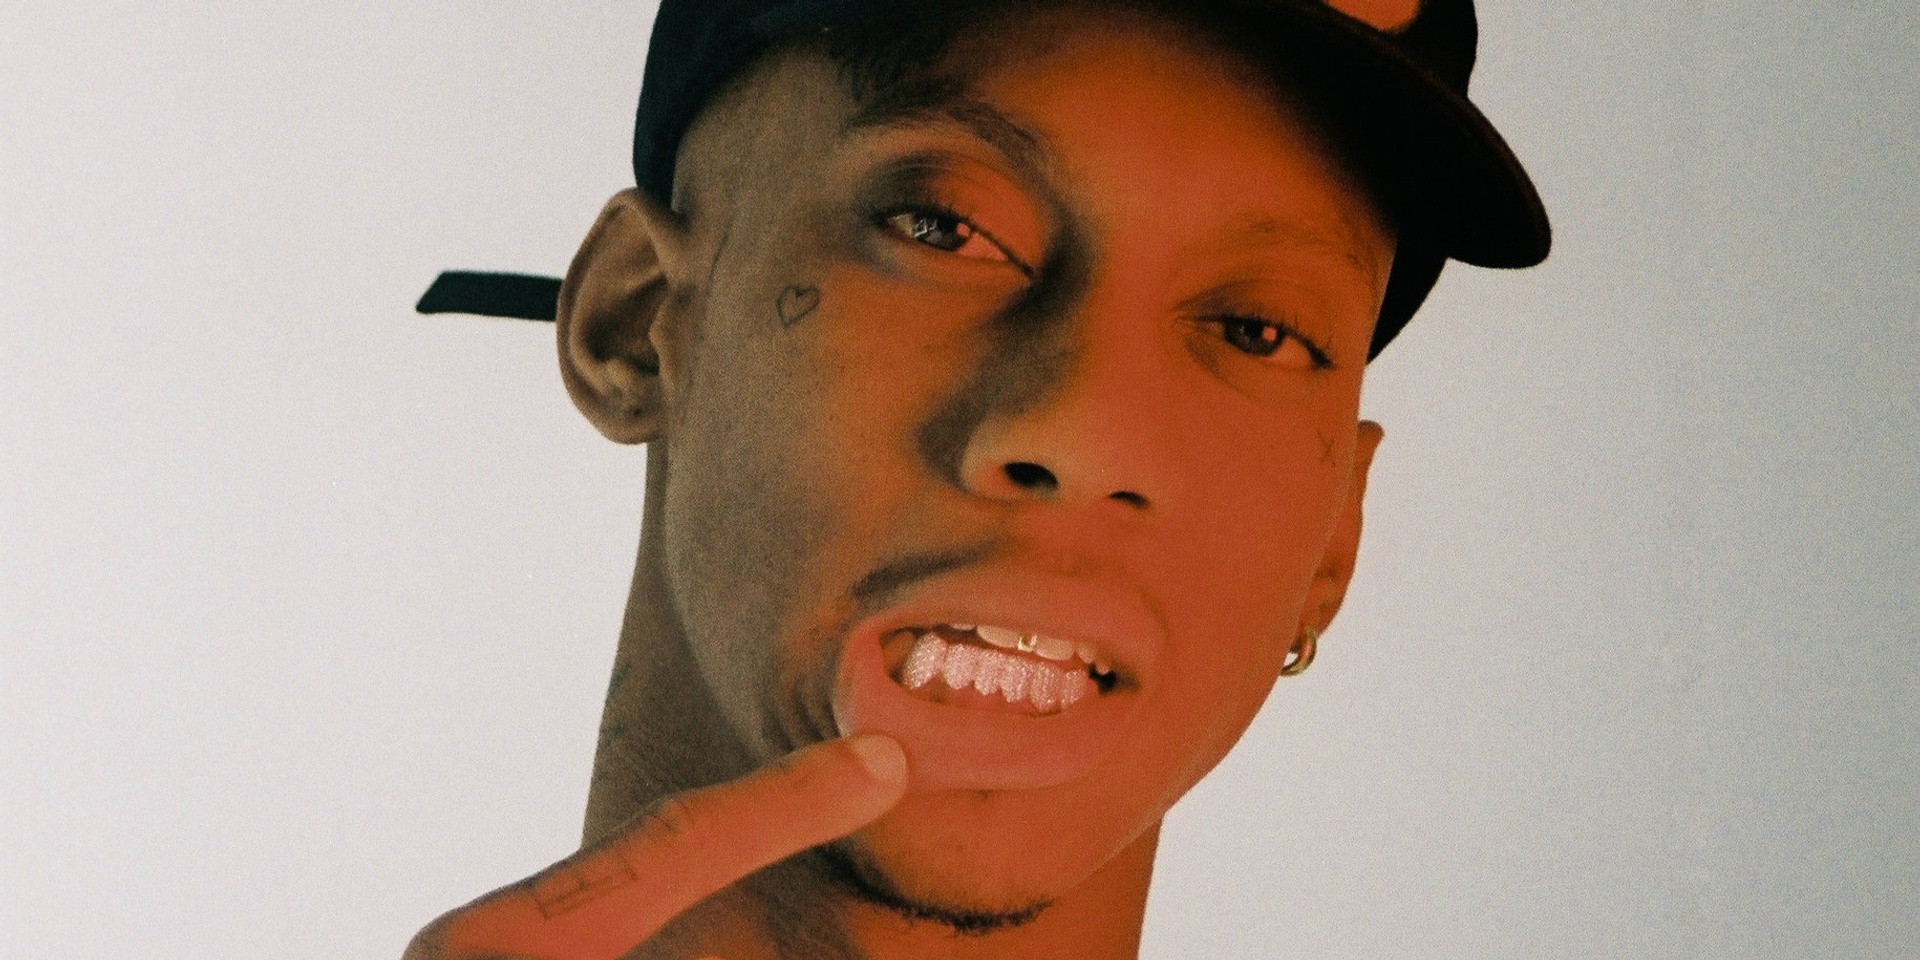 Octavian releases new mixtape, Endorphins, featuring A$AP Ferg, Skepta, and more – listen